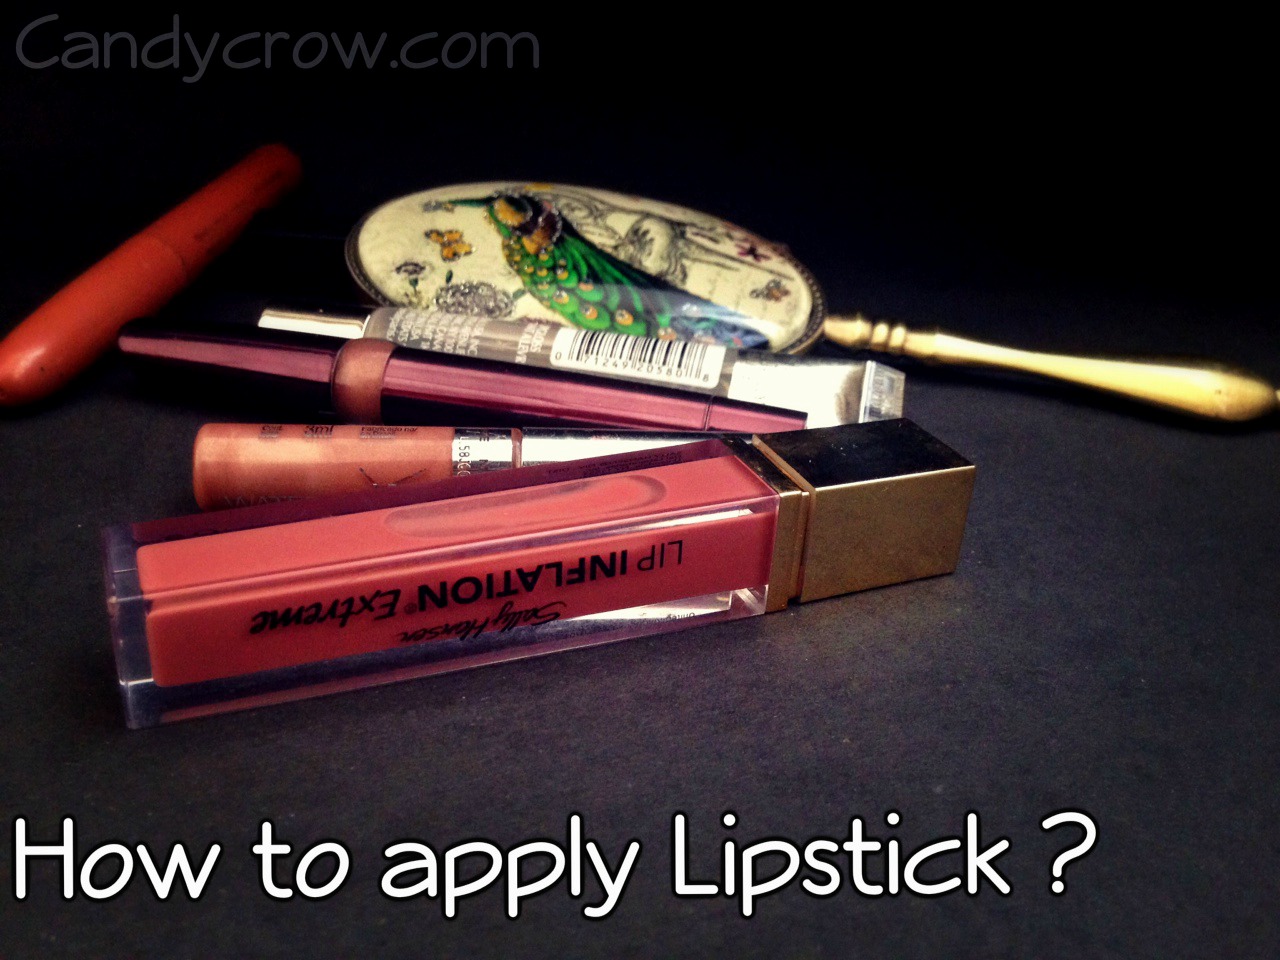 How to apply Lipstick (with photos)?